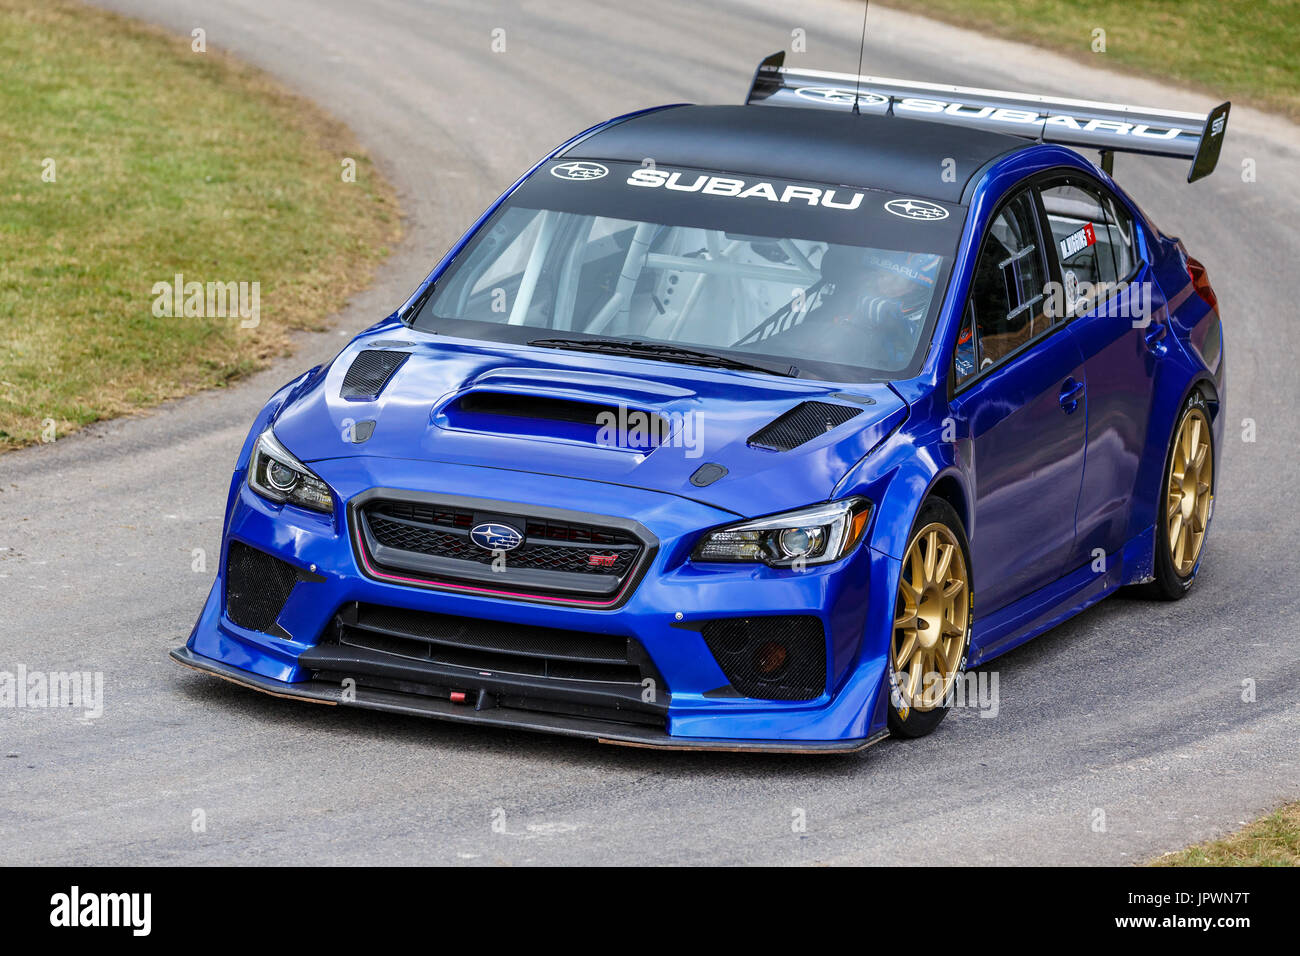 2016  Subaru WRX STi Isle Of Man lap record racer with driver Mark Higgins at the 2017 Goodwood Festival of Speed, Sussex, UK. Stock Photo